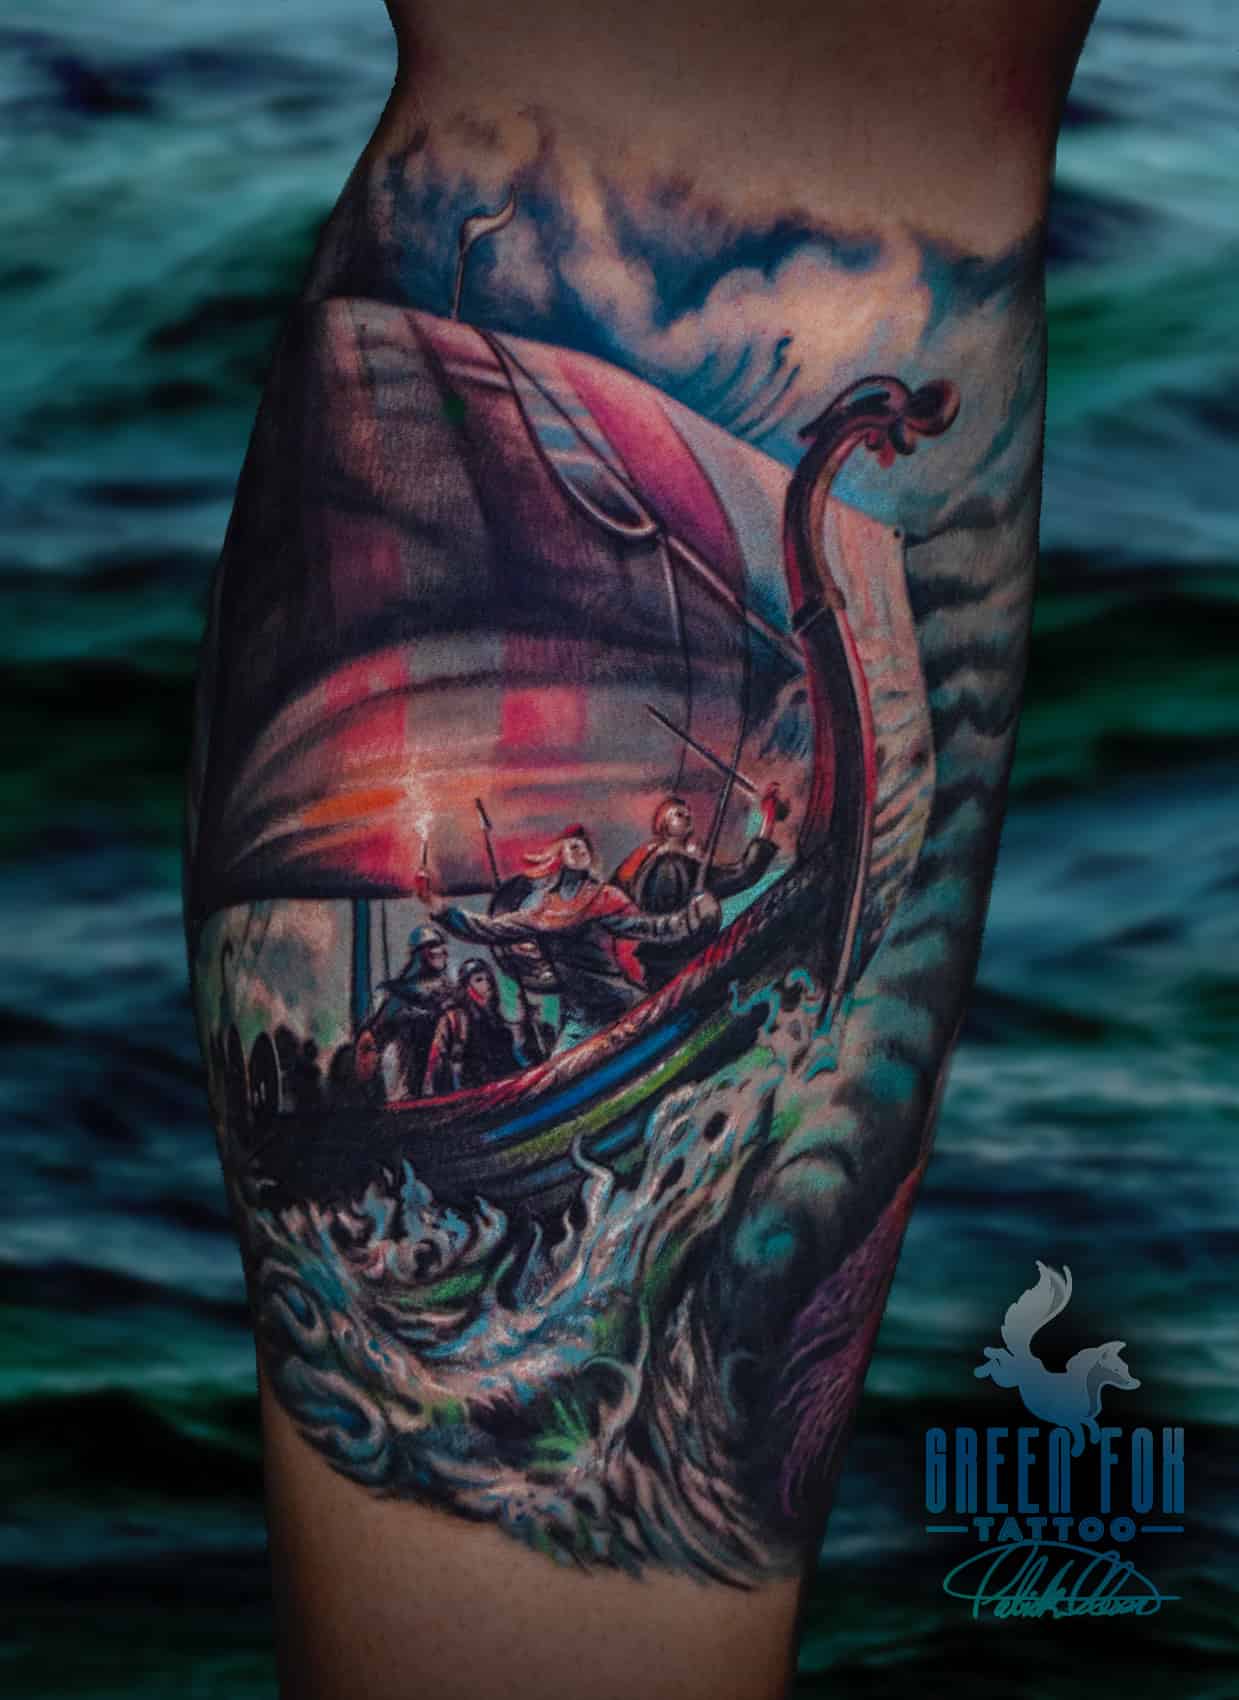 The Meaning of Traditional Ship Tattoos  Self Tattoo